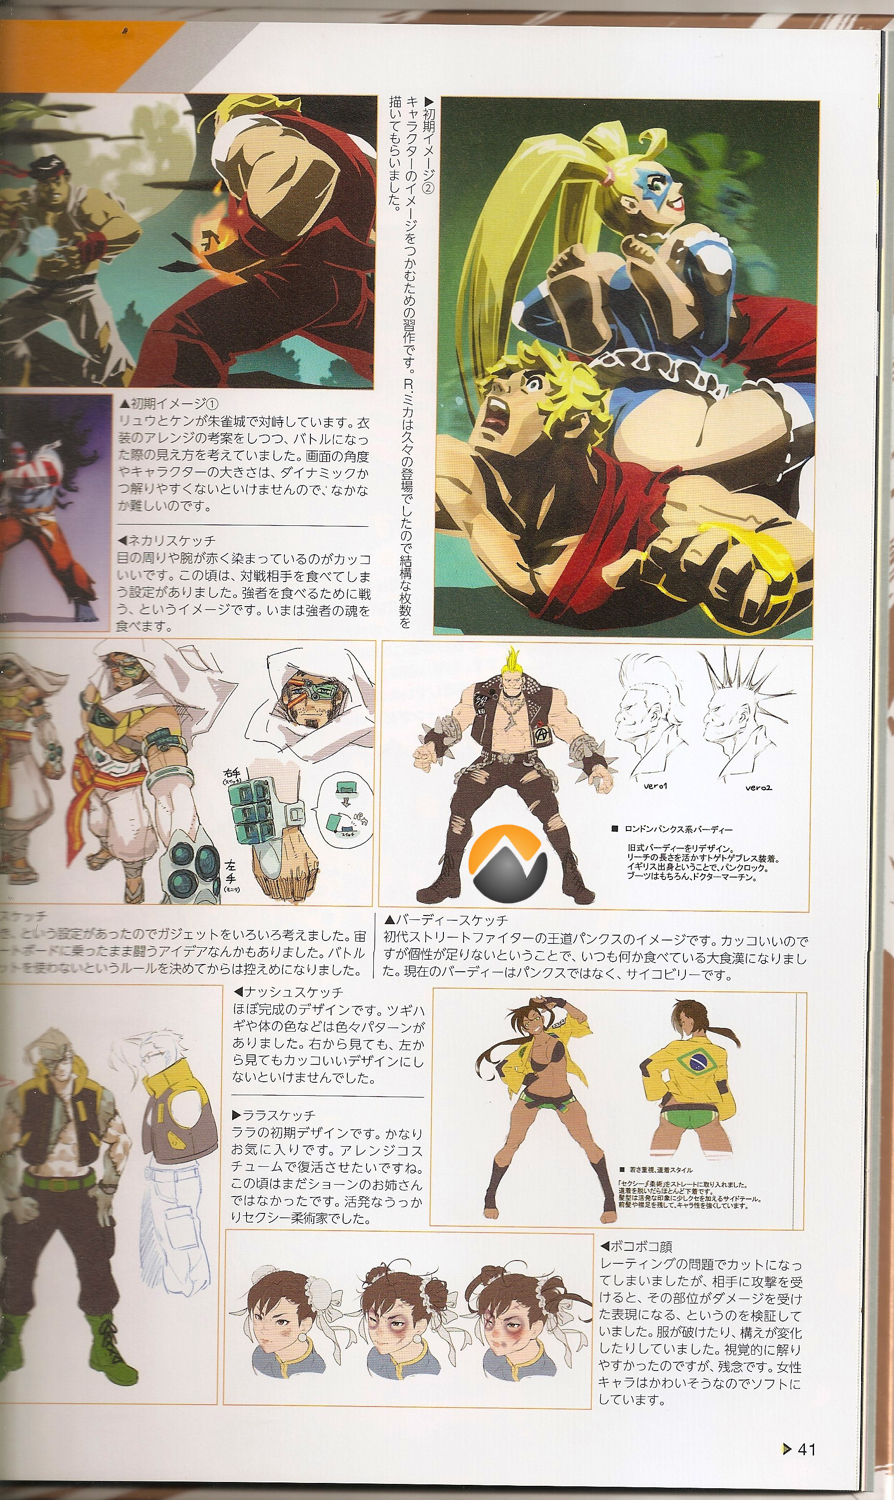 New Costumes Found In Update Streetfighter